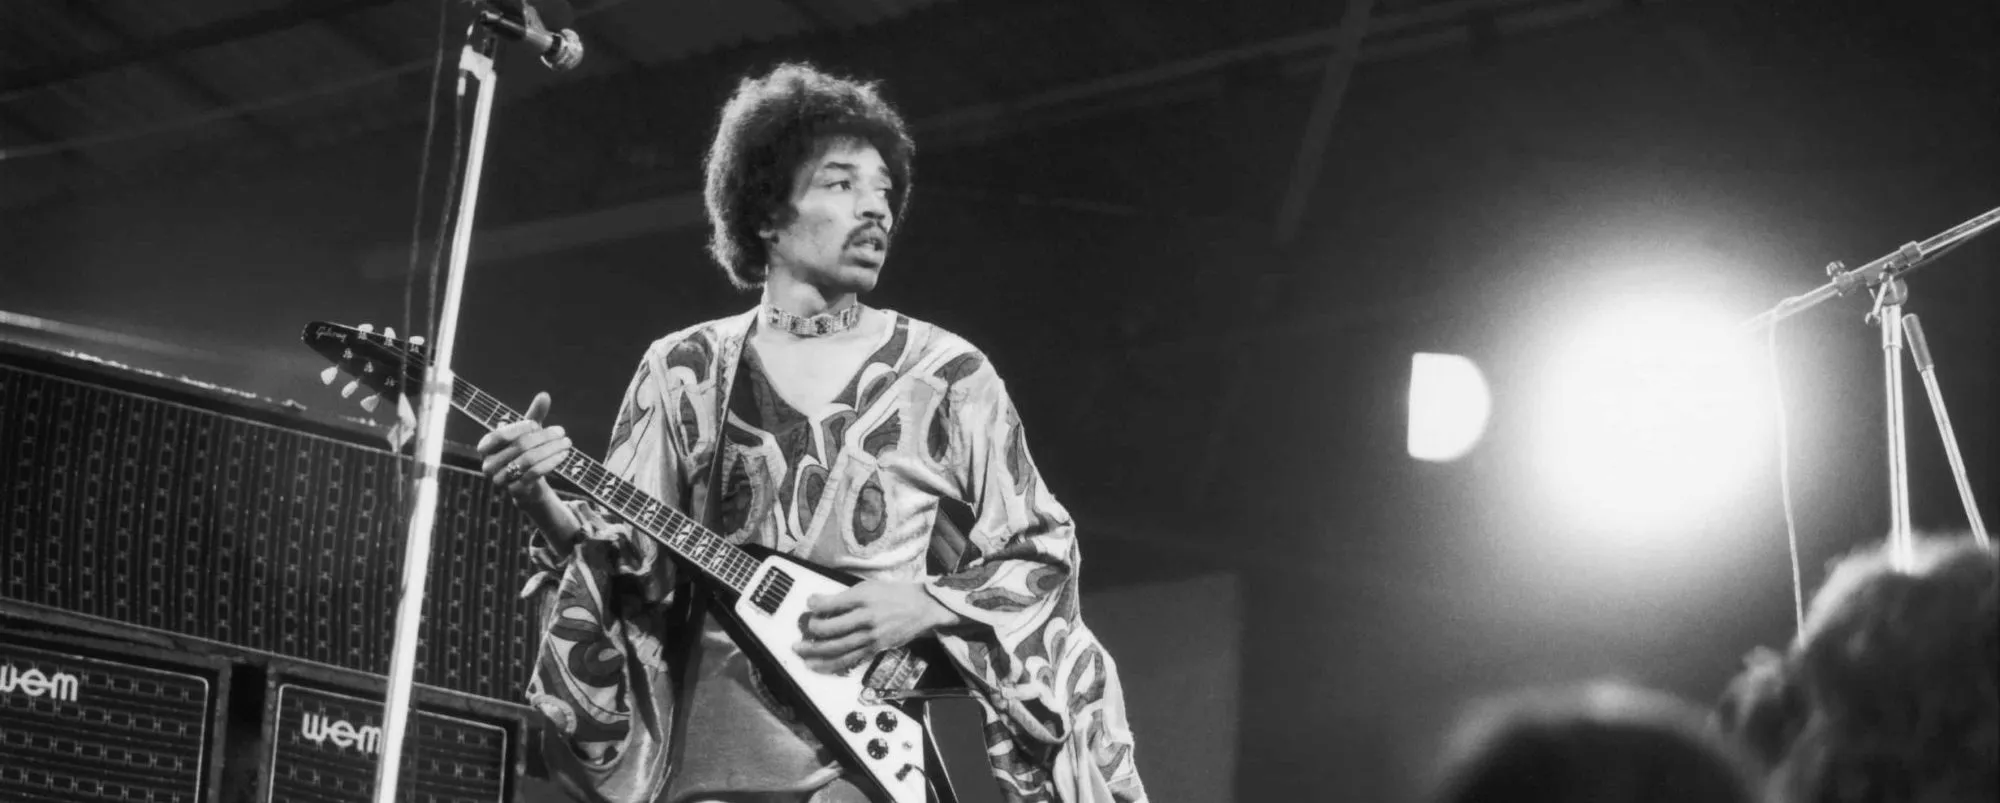 The 5 Greatest Guitarists in Rock History